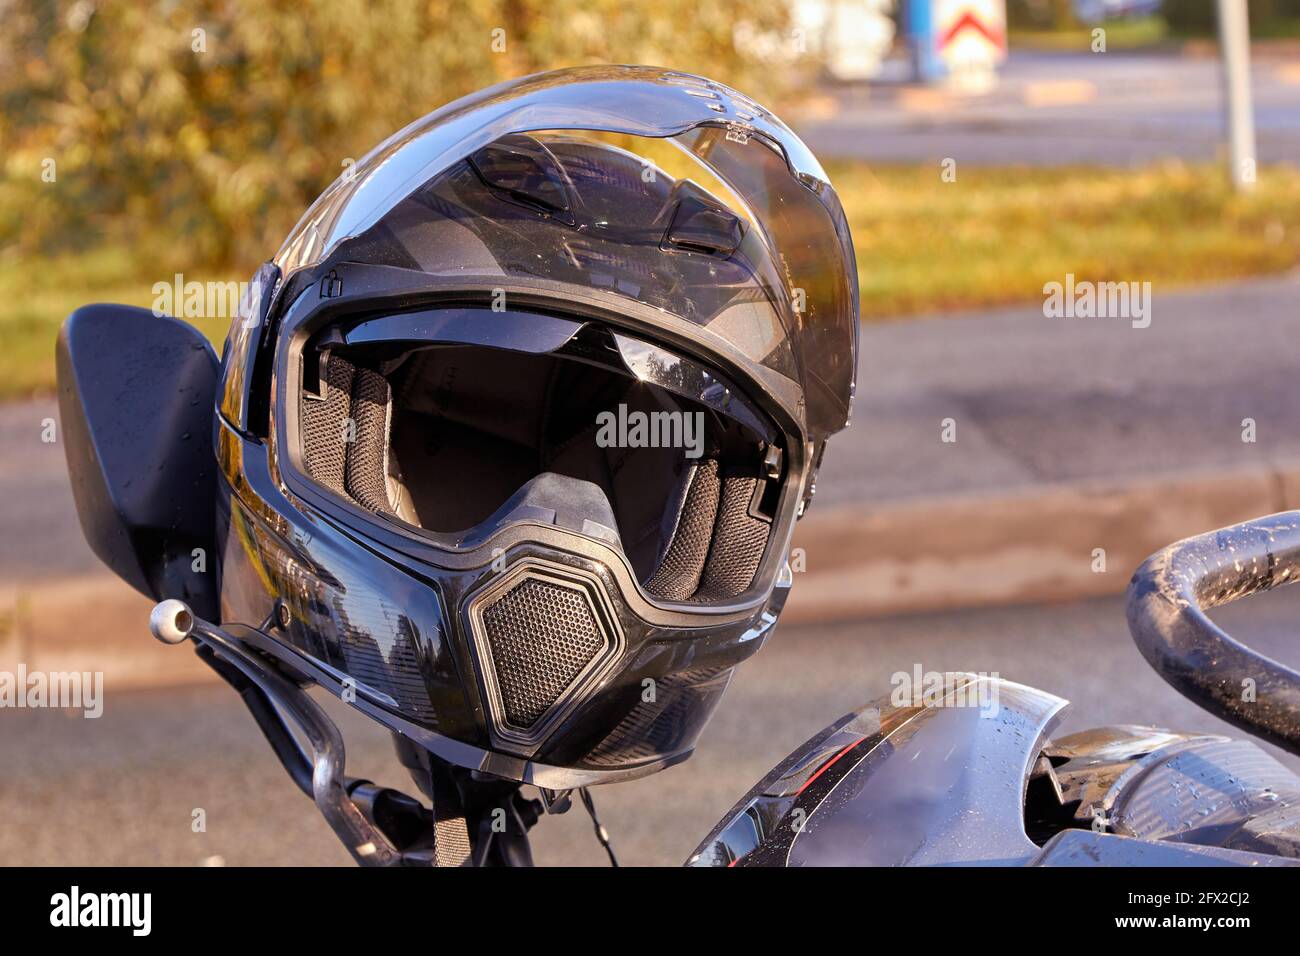 October 13, 2020, Riga, Latvia, damaged  motorbike on the city road at the scene of an accident Stock Photo